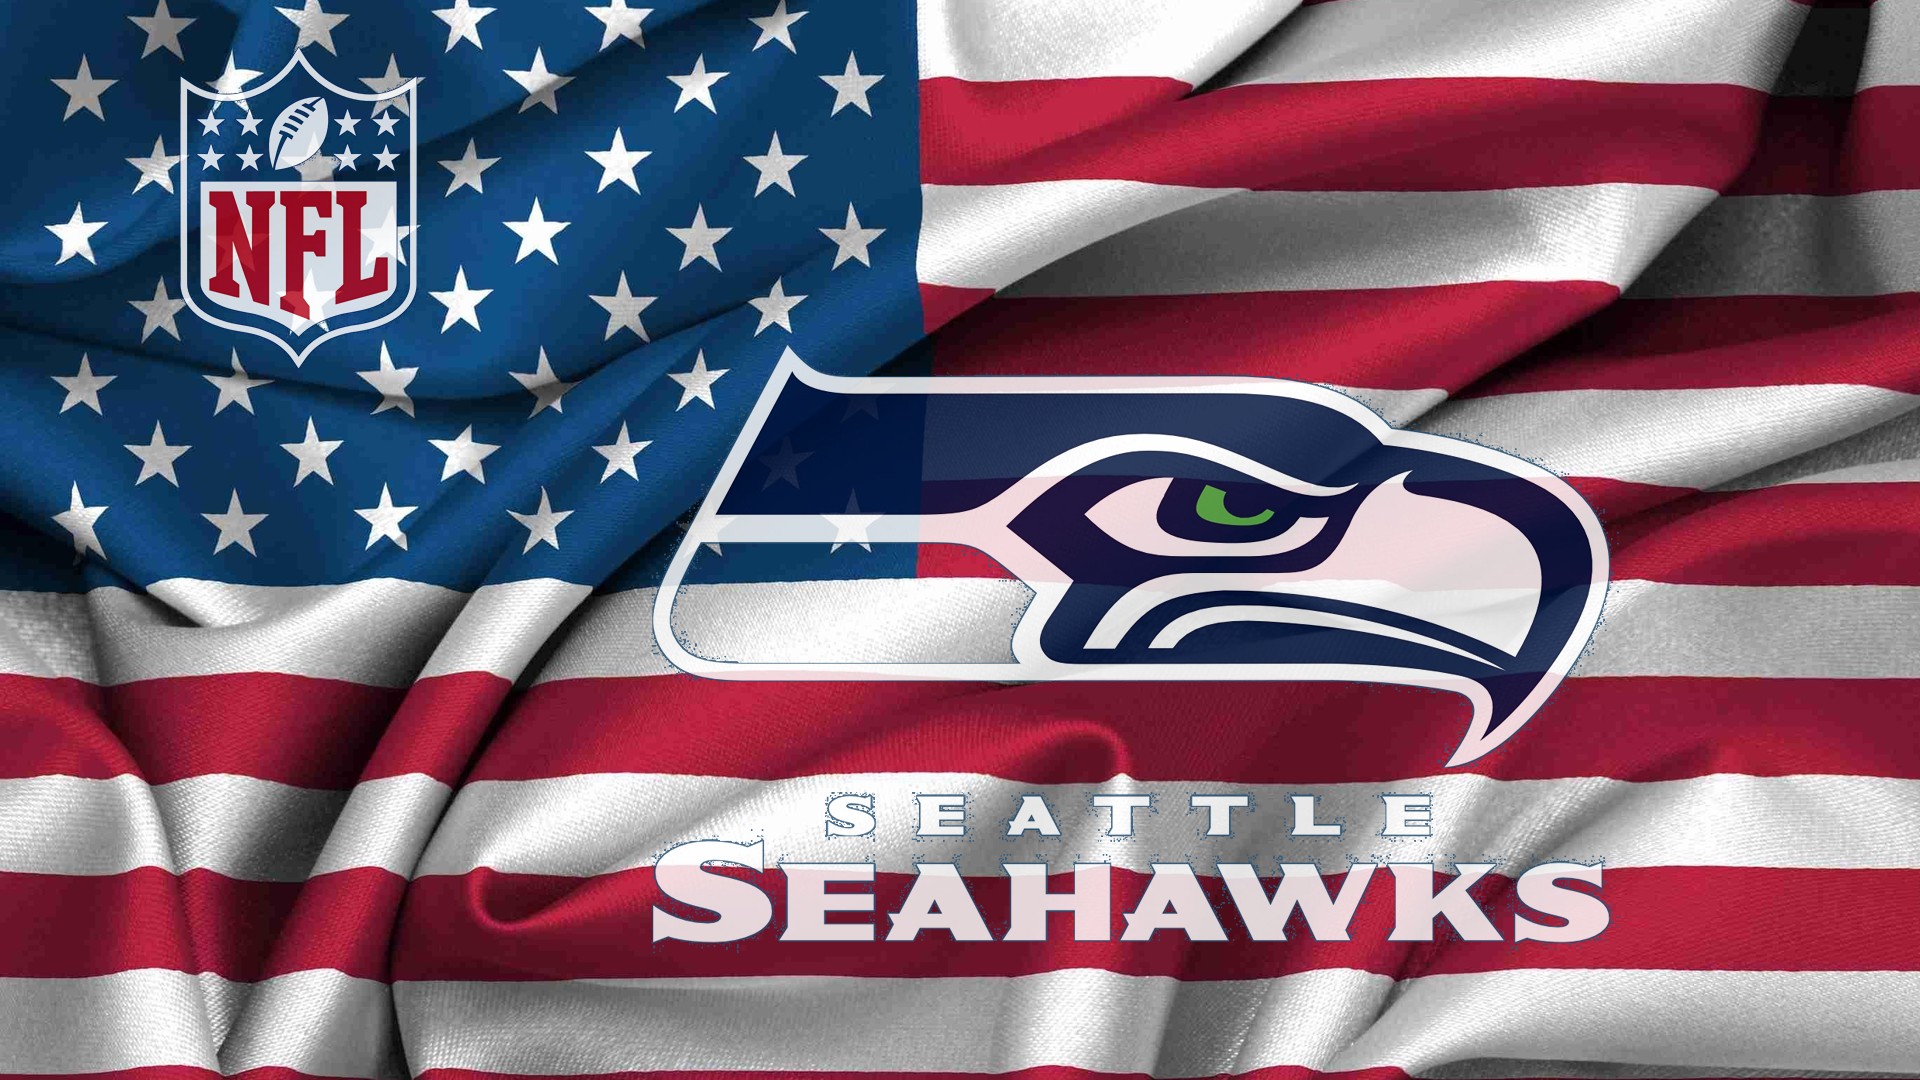 Seattle Seahawks Nfl 1920x1080 Hd Images 1920x1080